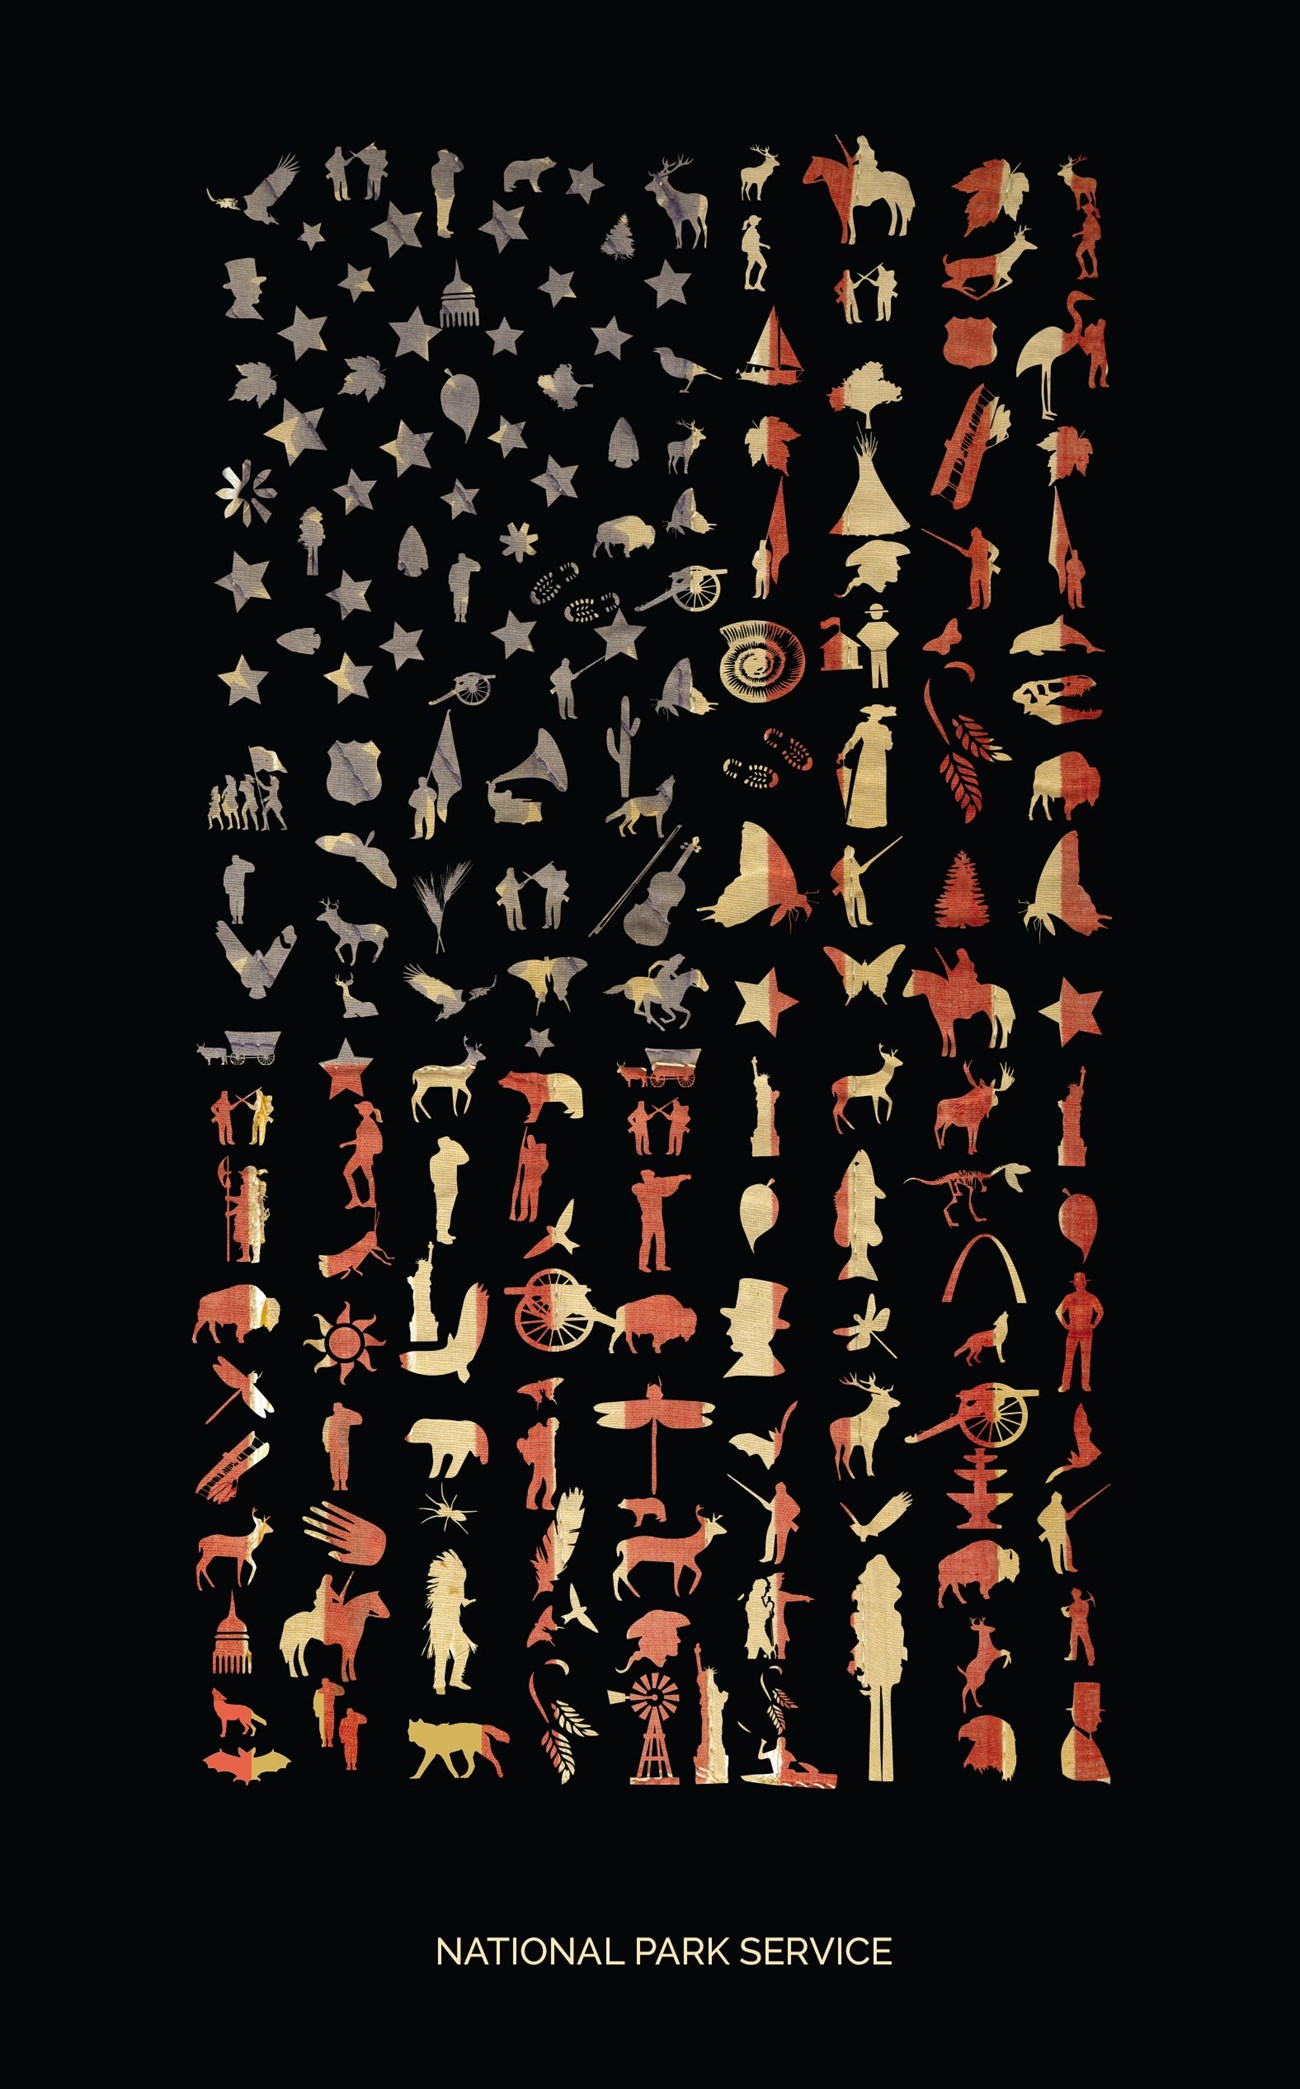 American flag constructed of images related to the National Park Service on a black background